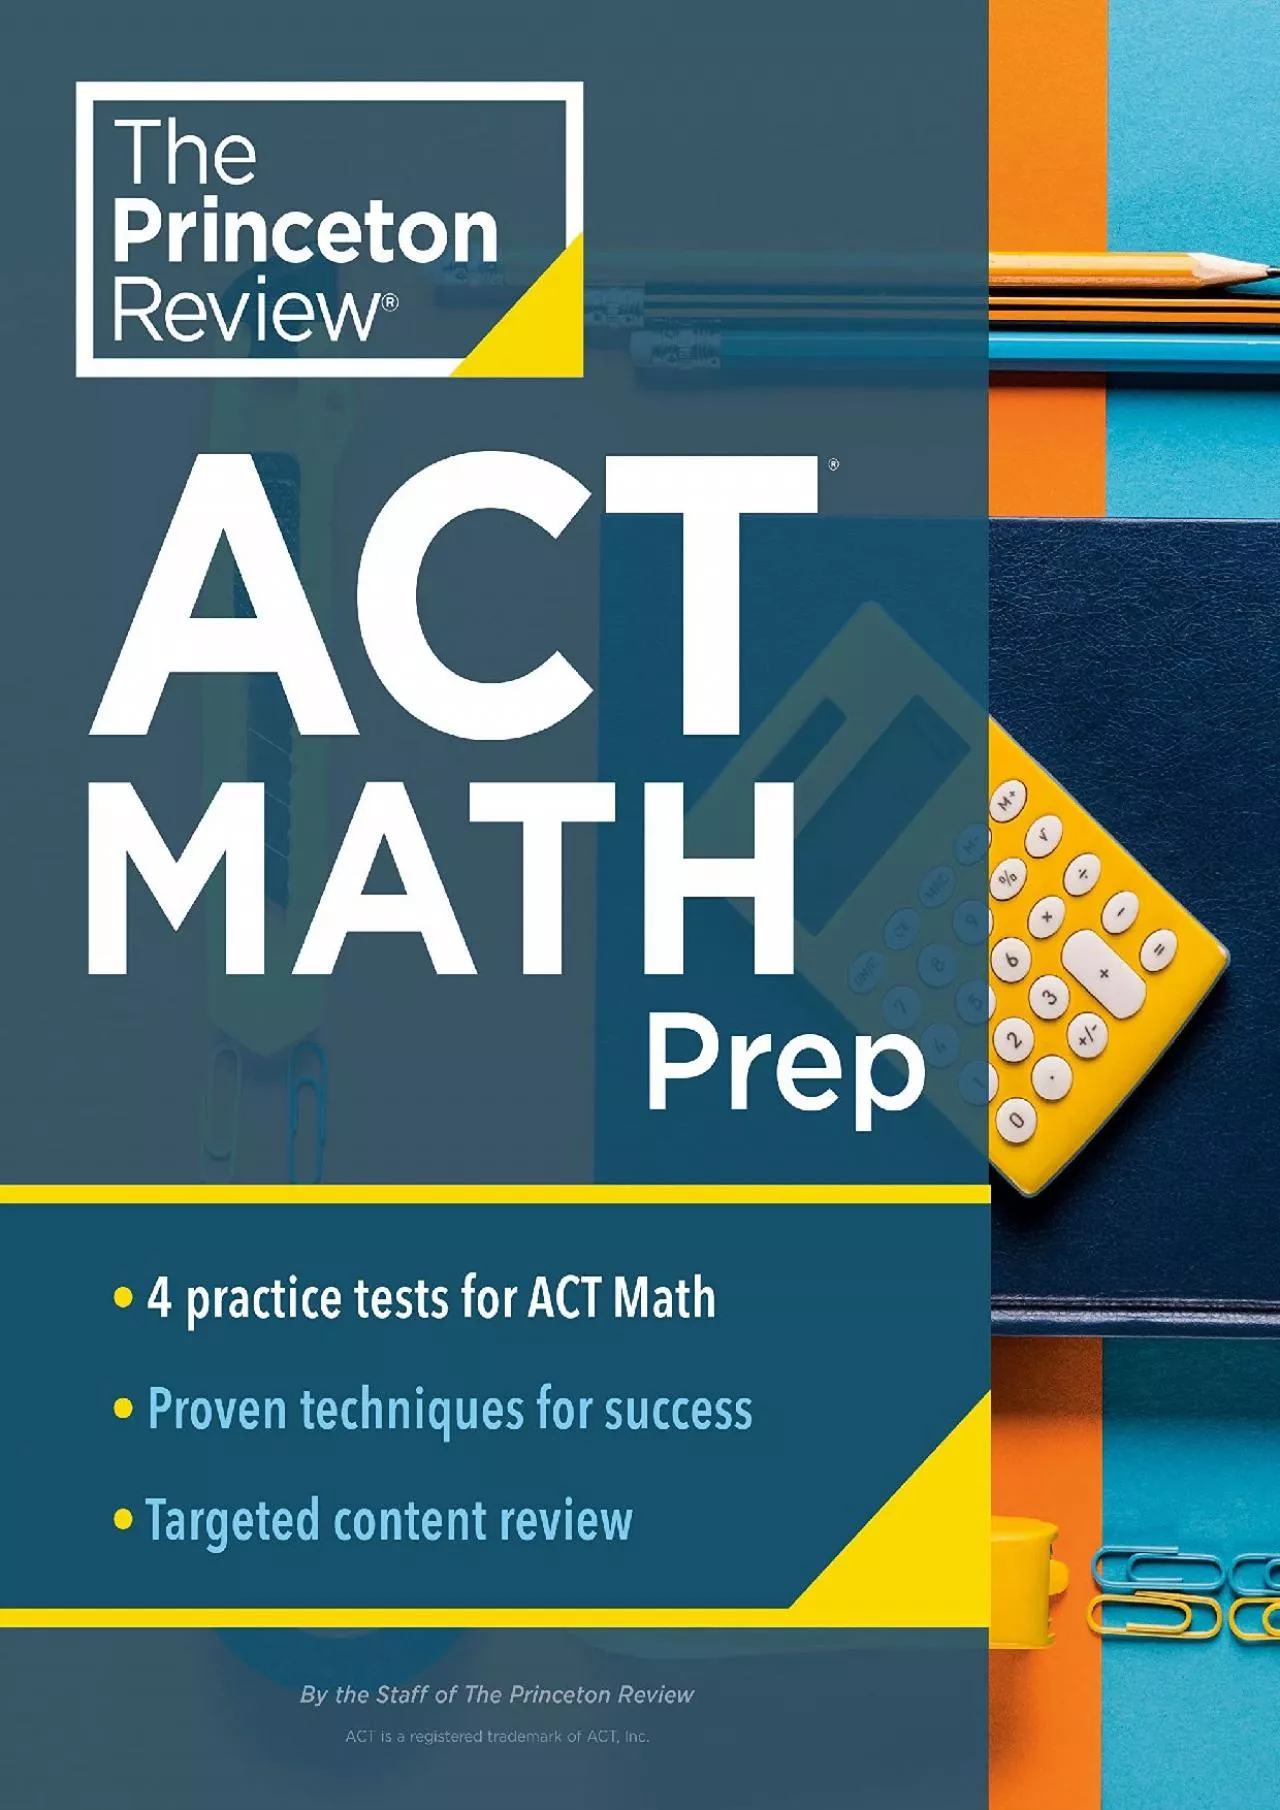 [DOWNLOAD] Princeton Review ACT Math Prep: 4 Practice Tests + Review + Strategy for the